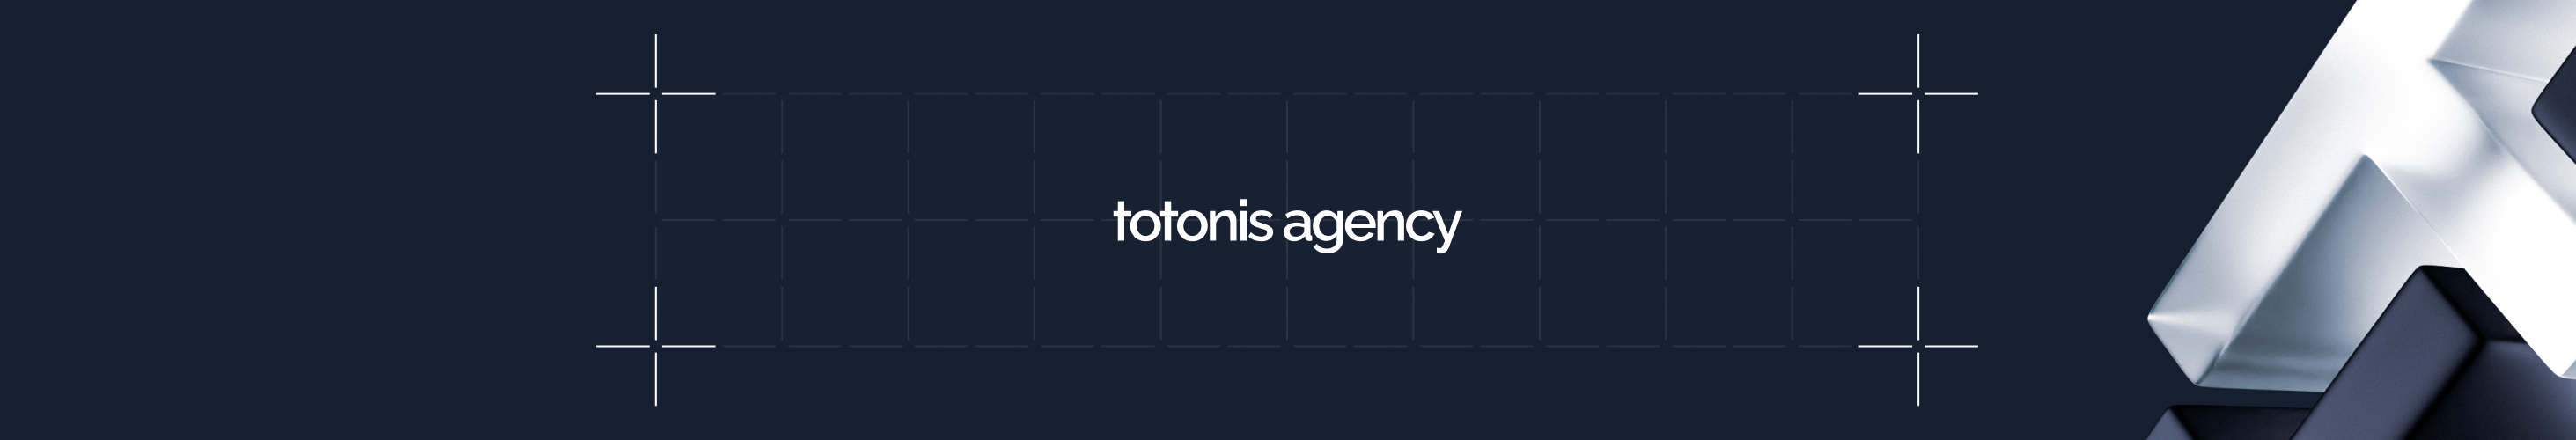 Totonis Agency's profile banner